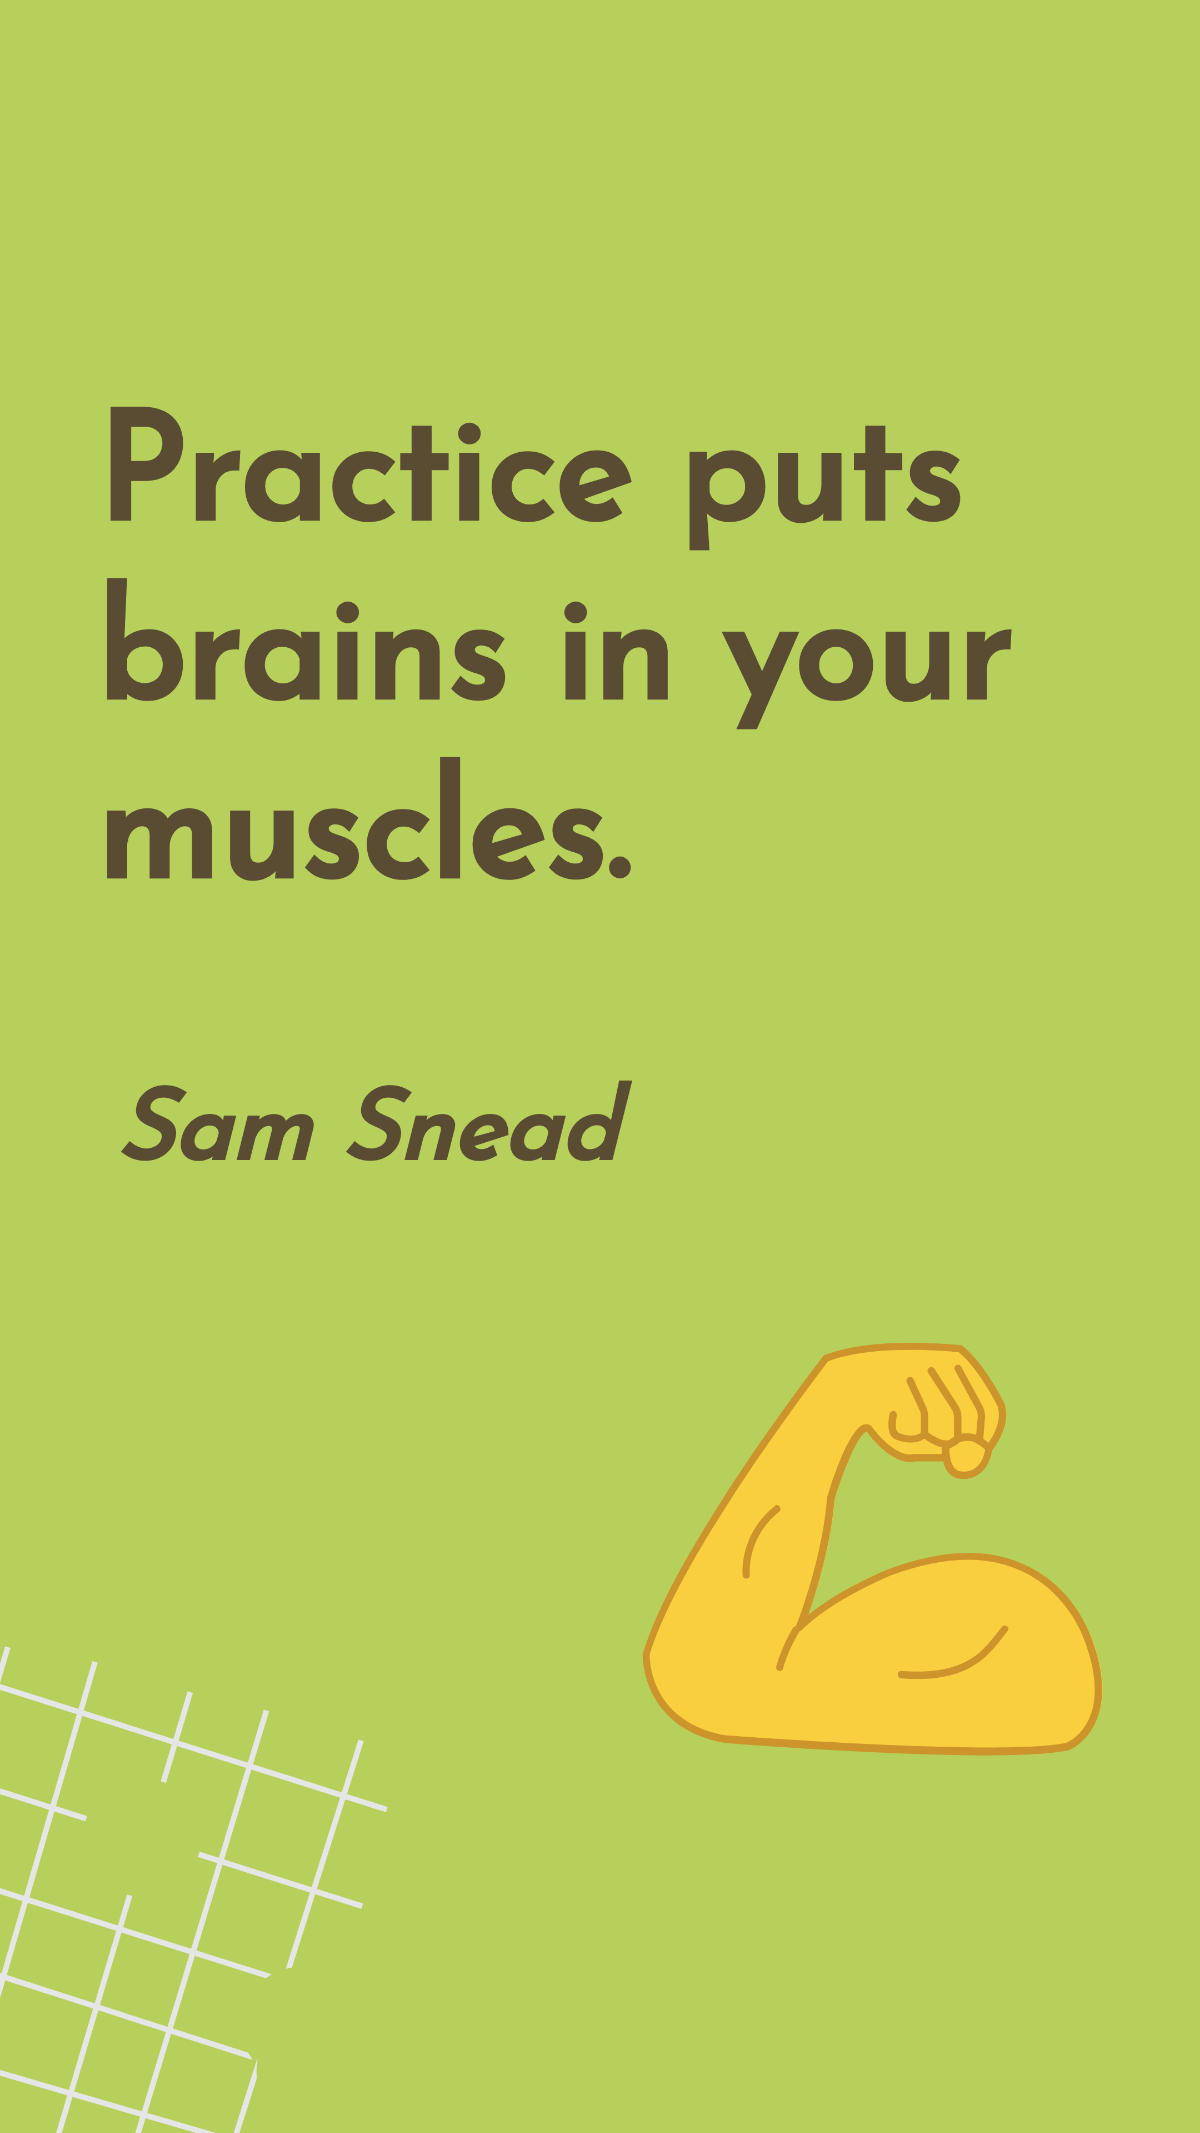 Sam Snead - Practice puts brains in your muscles. Template